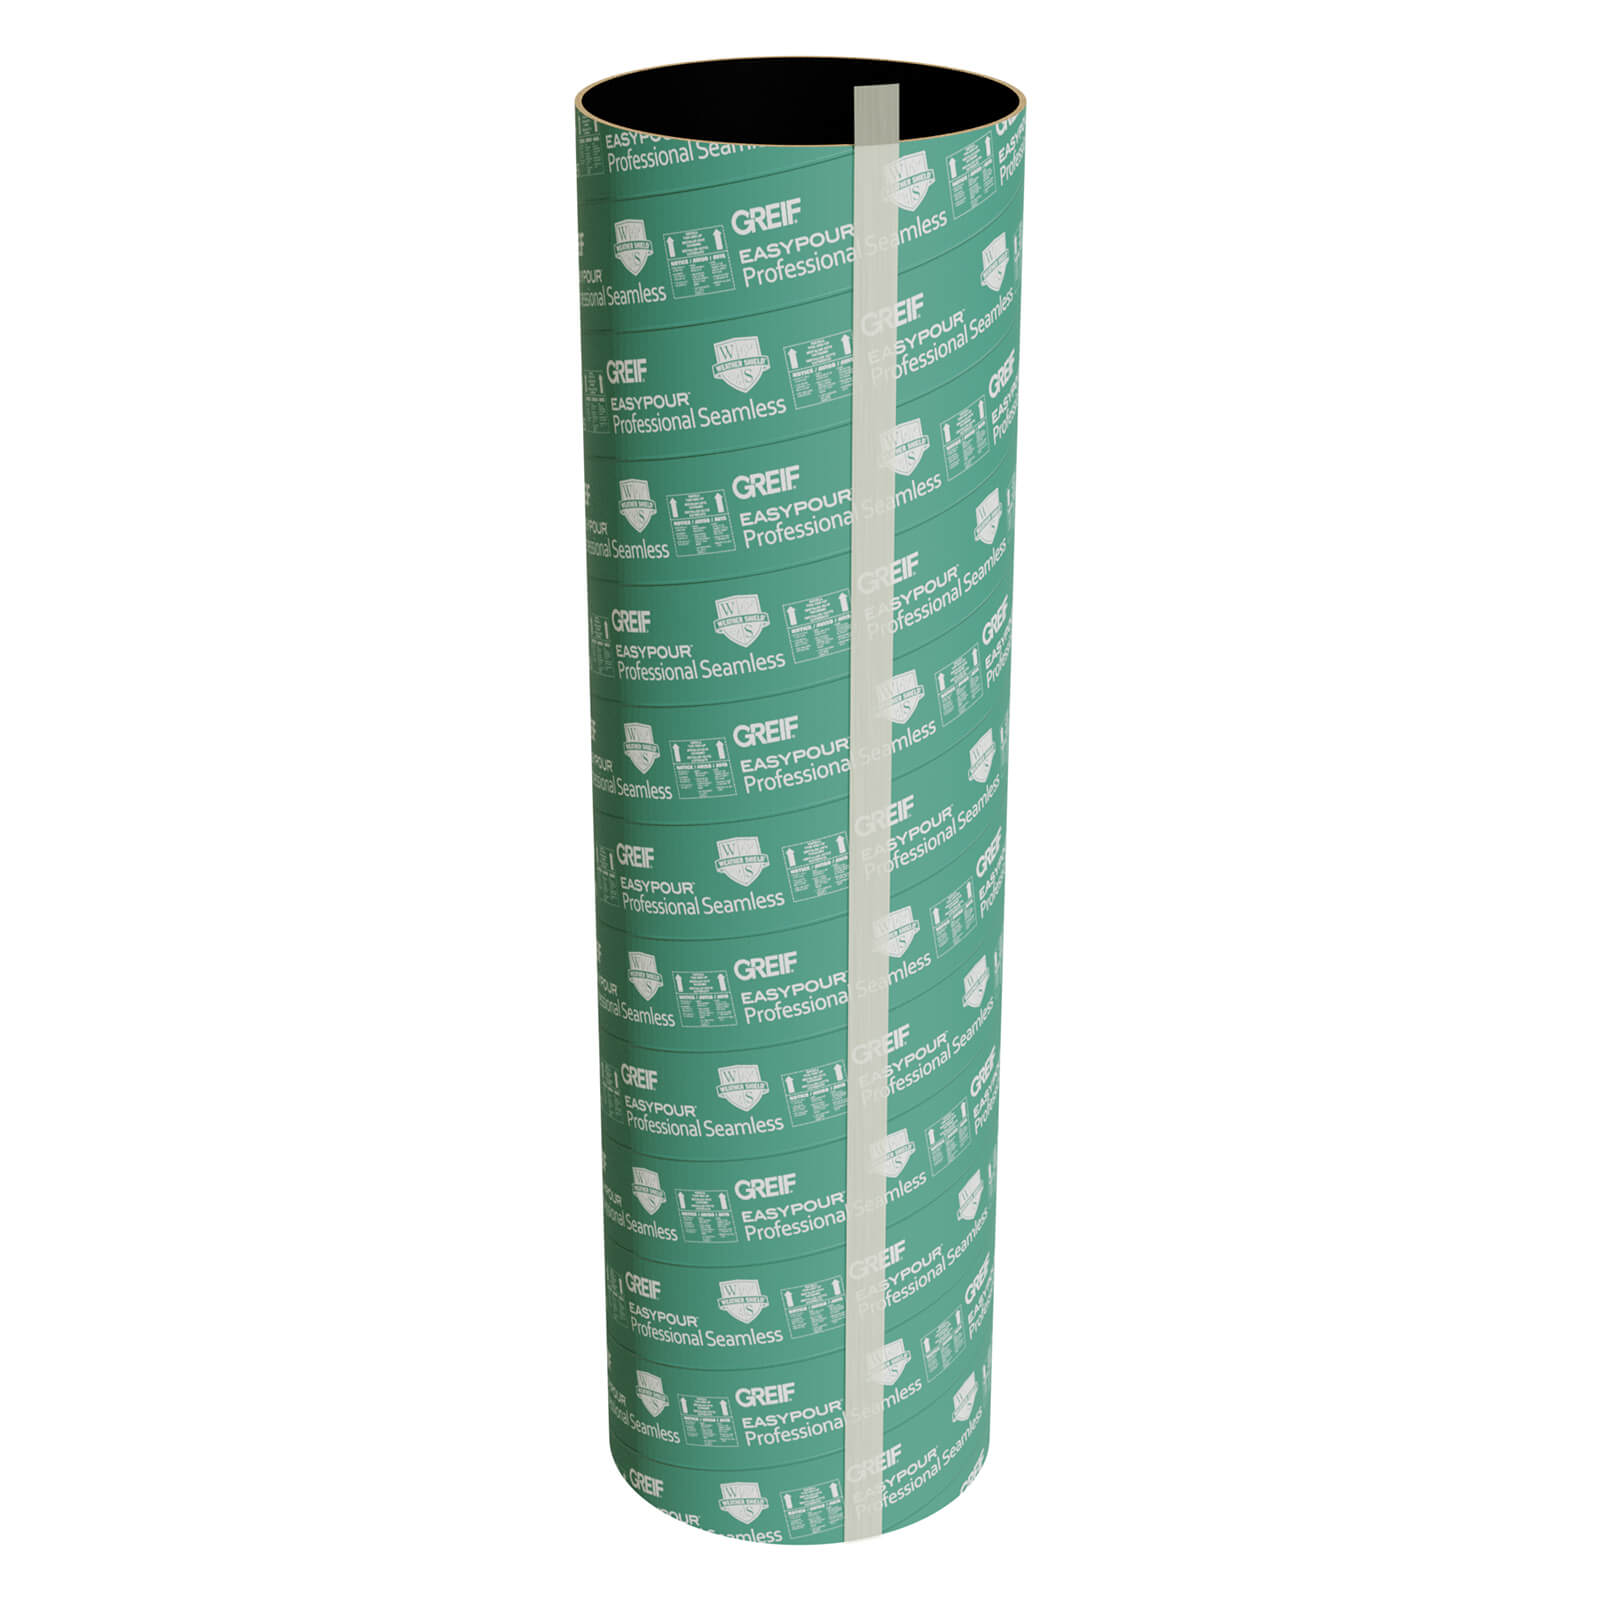 Greif Professional Seamless Forming Tubes — Form and Build Supply Inc.